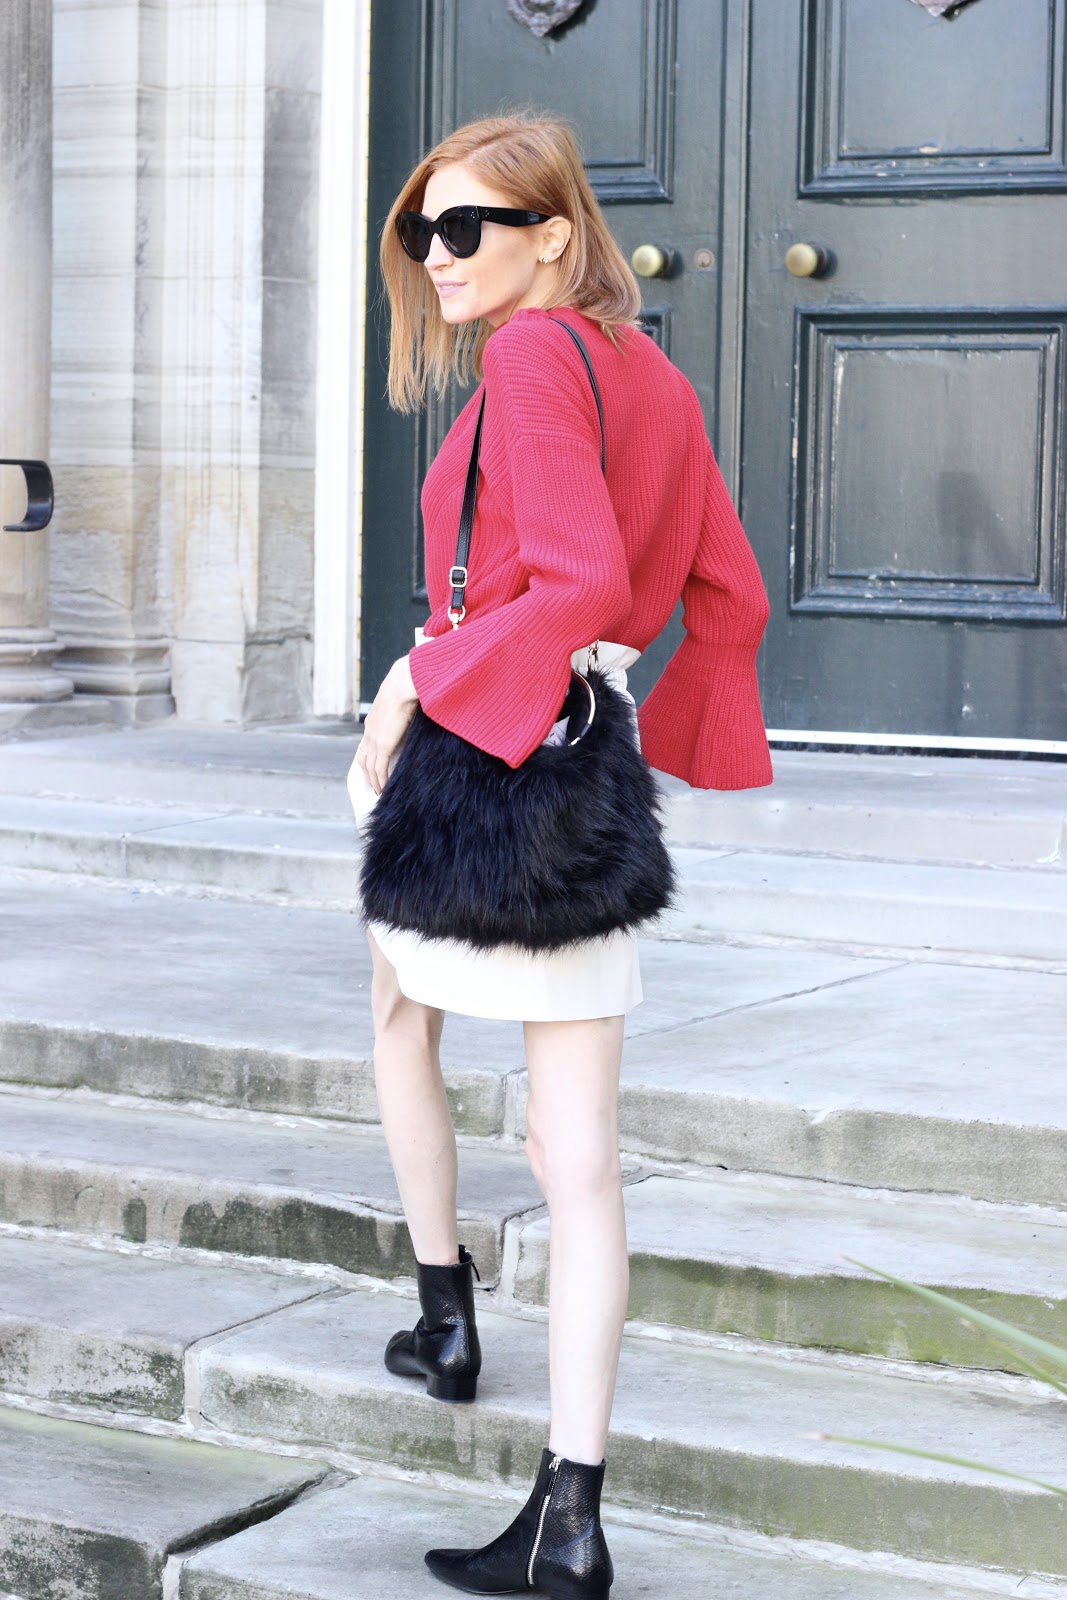 Red for Fall- LOFT red sweater, Zara white leather mini skirt, Zara leather booties , Target faux fur purse, Celine sunglasses 